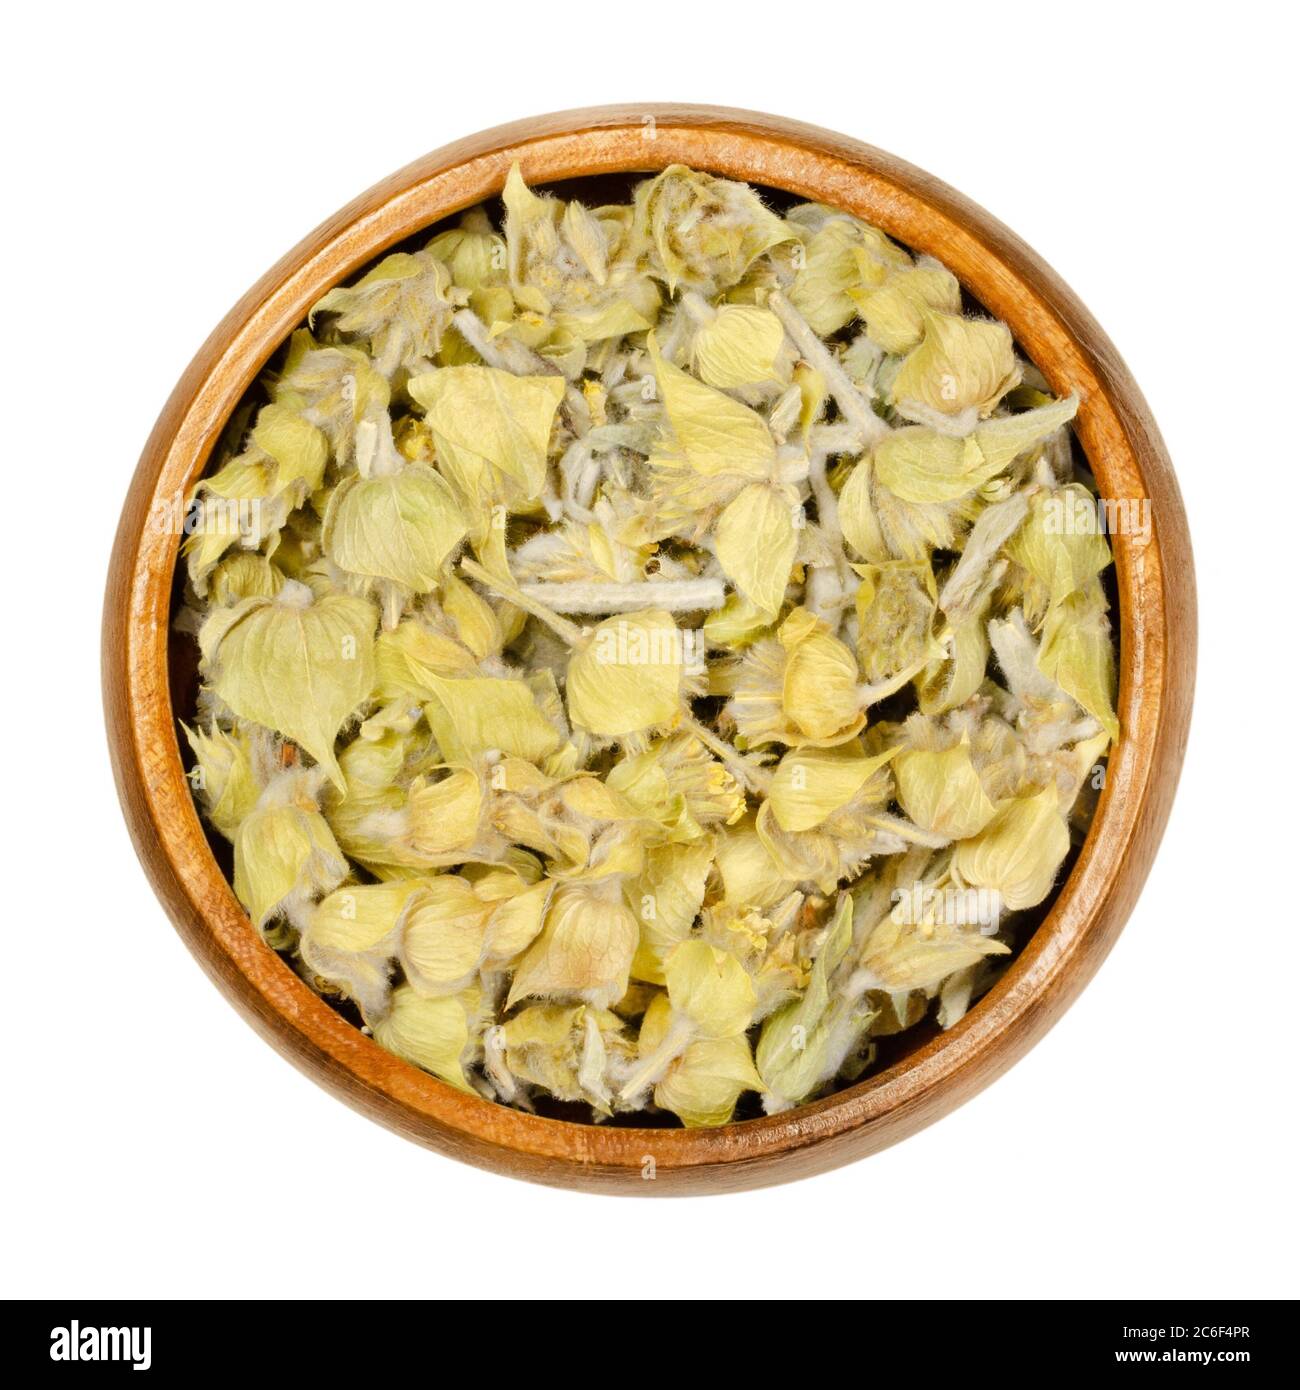 Greek mountain tea in wooden bowl. Also known as ironwort, Sideritis or shepherds tea. Dried flowering plants used as herbal medicine and tea. Stock Photo